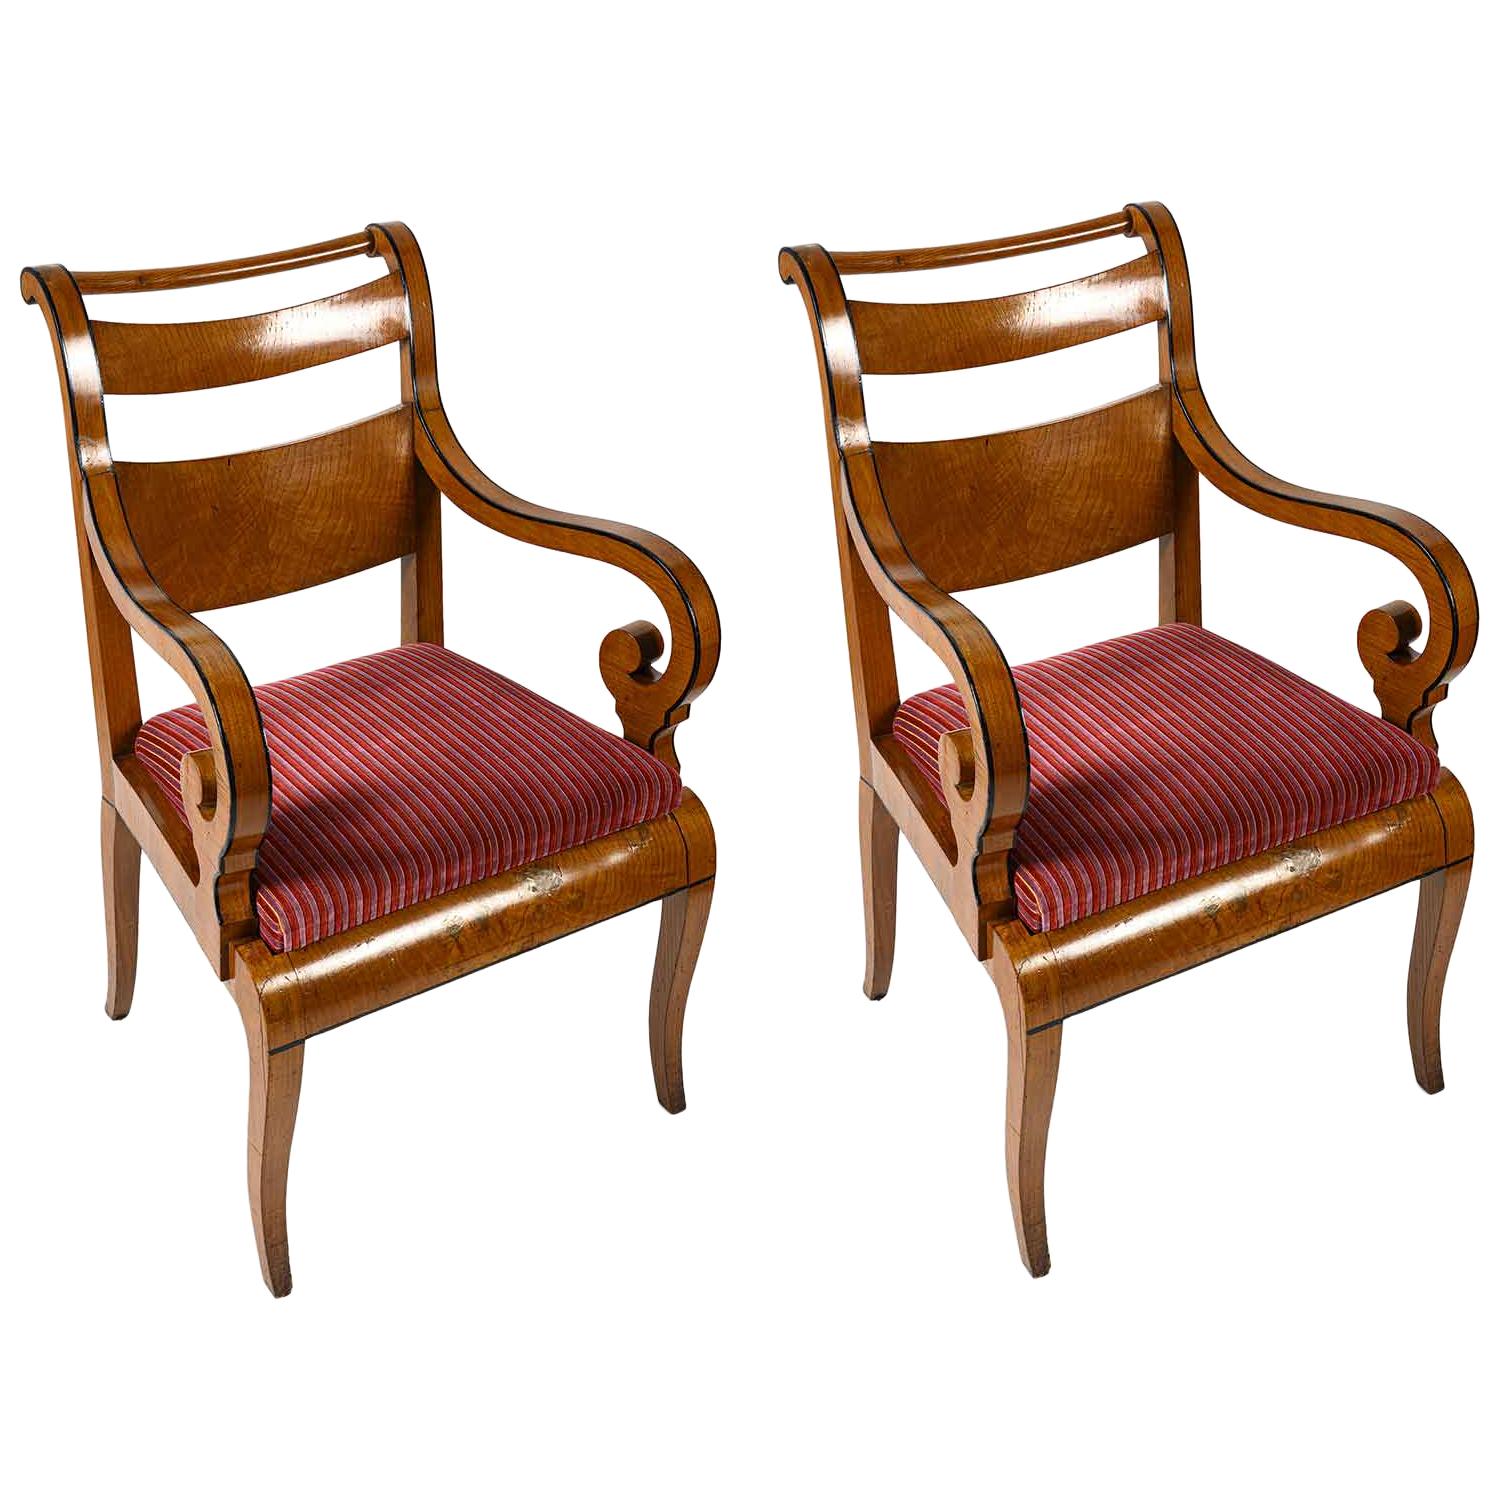 Set of four Italian Genoese Charles X maple veneer chairs and a pair of armchairs dating back to 1820 circa, with new red and purple velvet upholstery, in good condition. This set of antique seating dates back to the first decades of the 19th